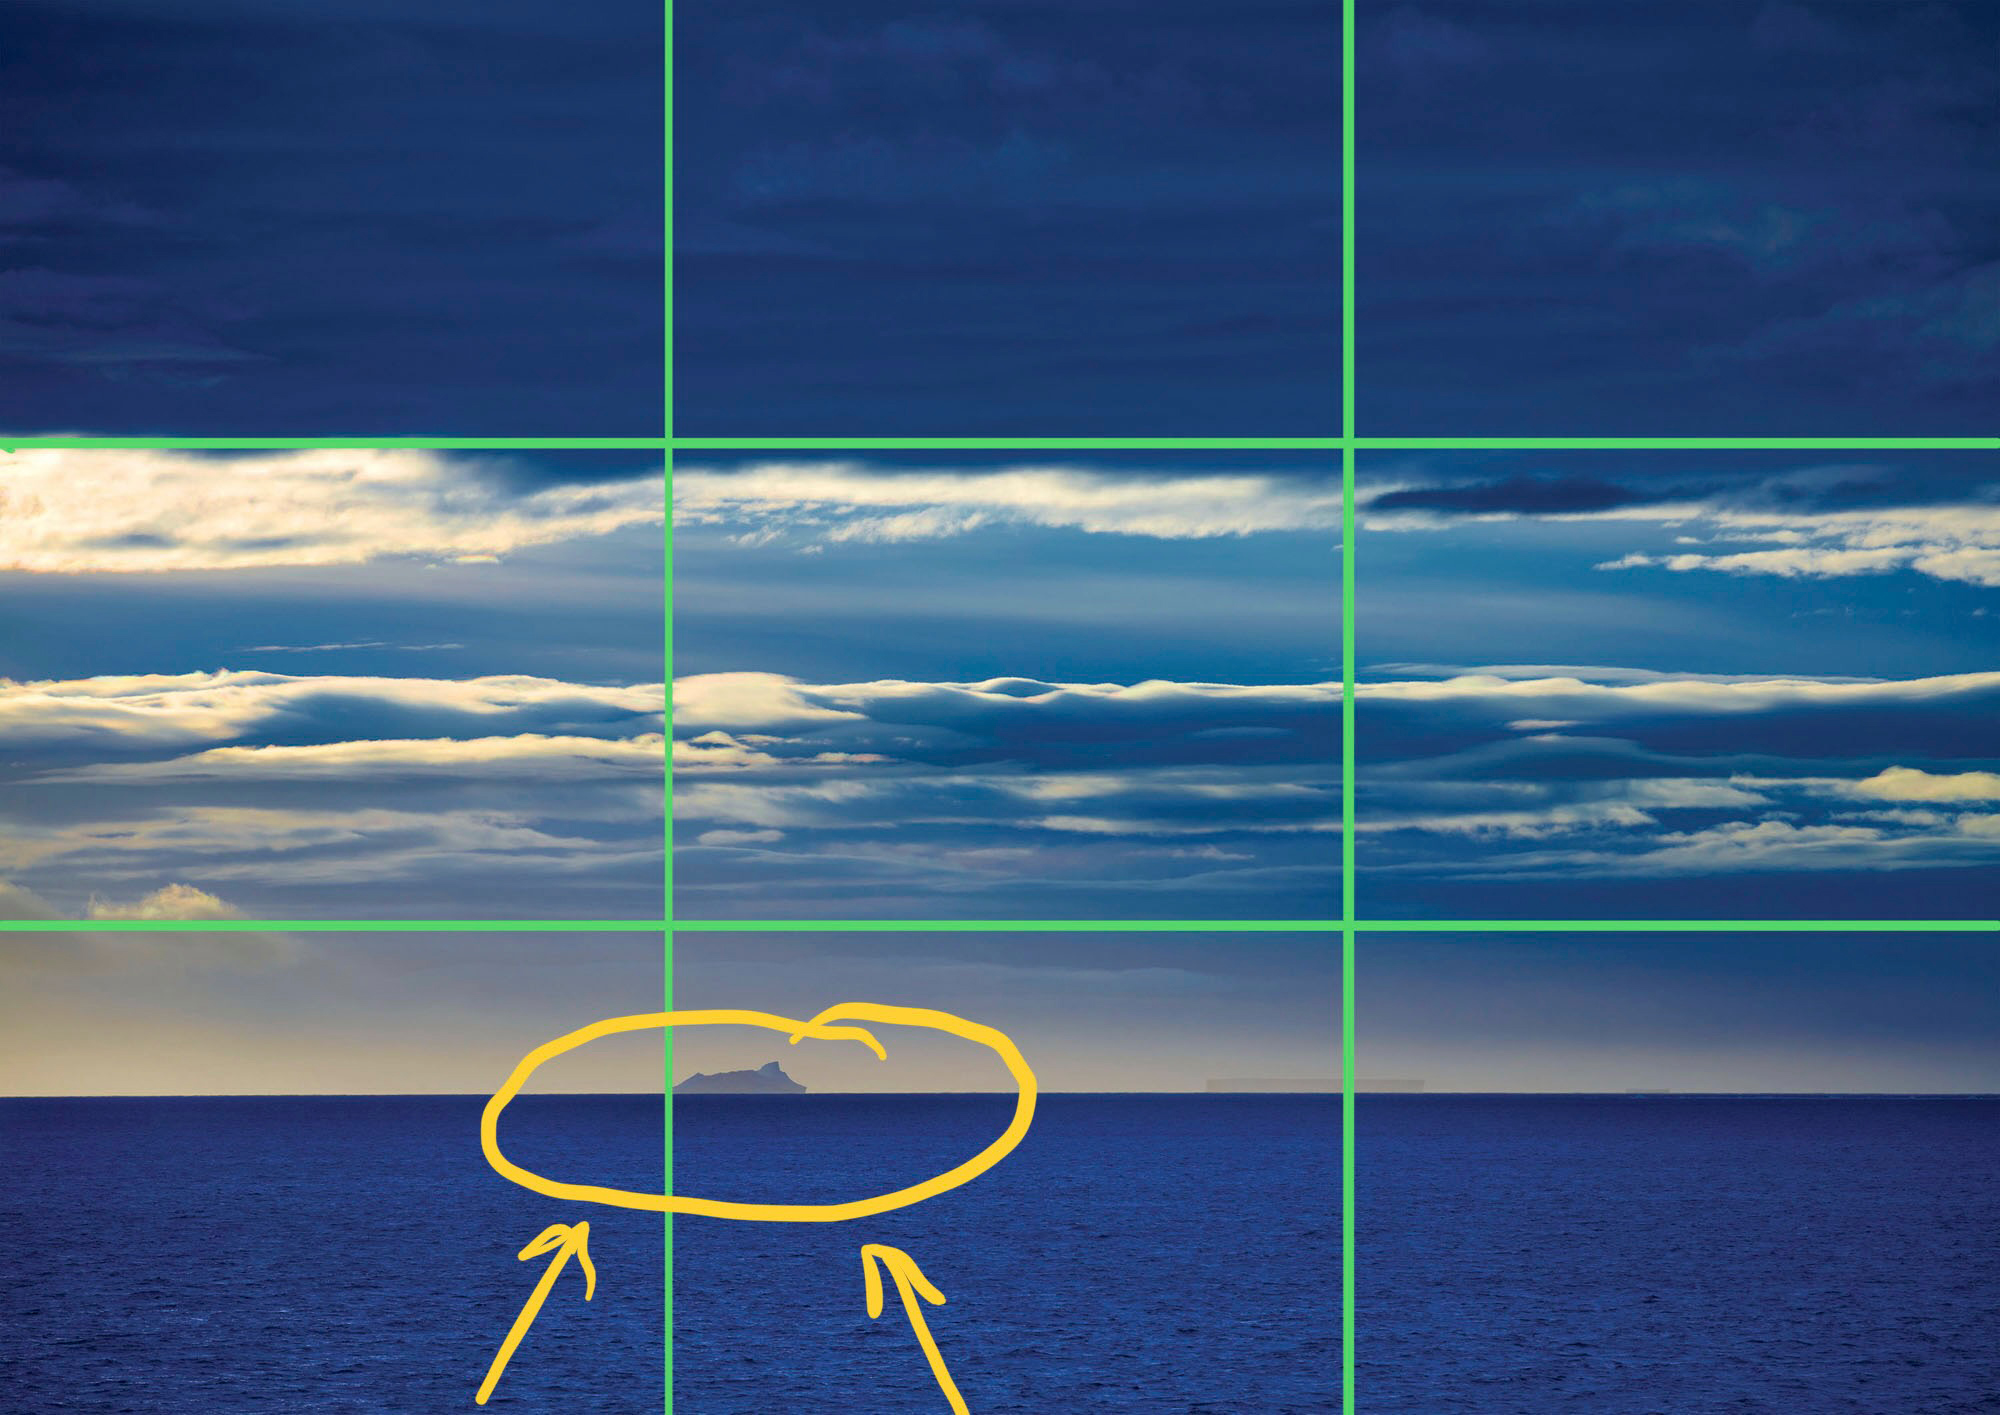 The position of the centre of interest doesn't have to be exactly on the rule of thirds - the most important point is that it's not in the centre!